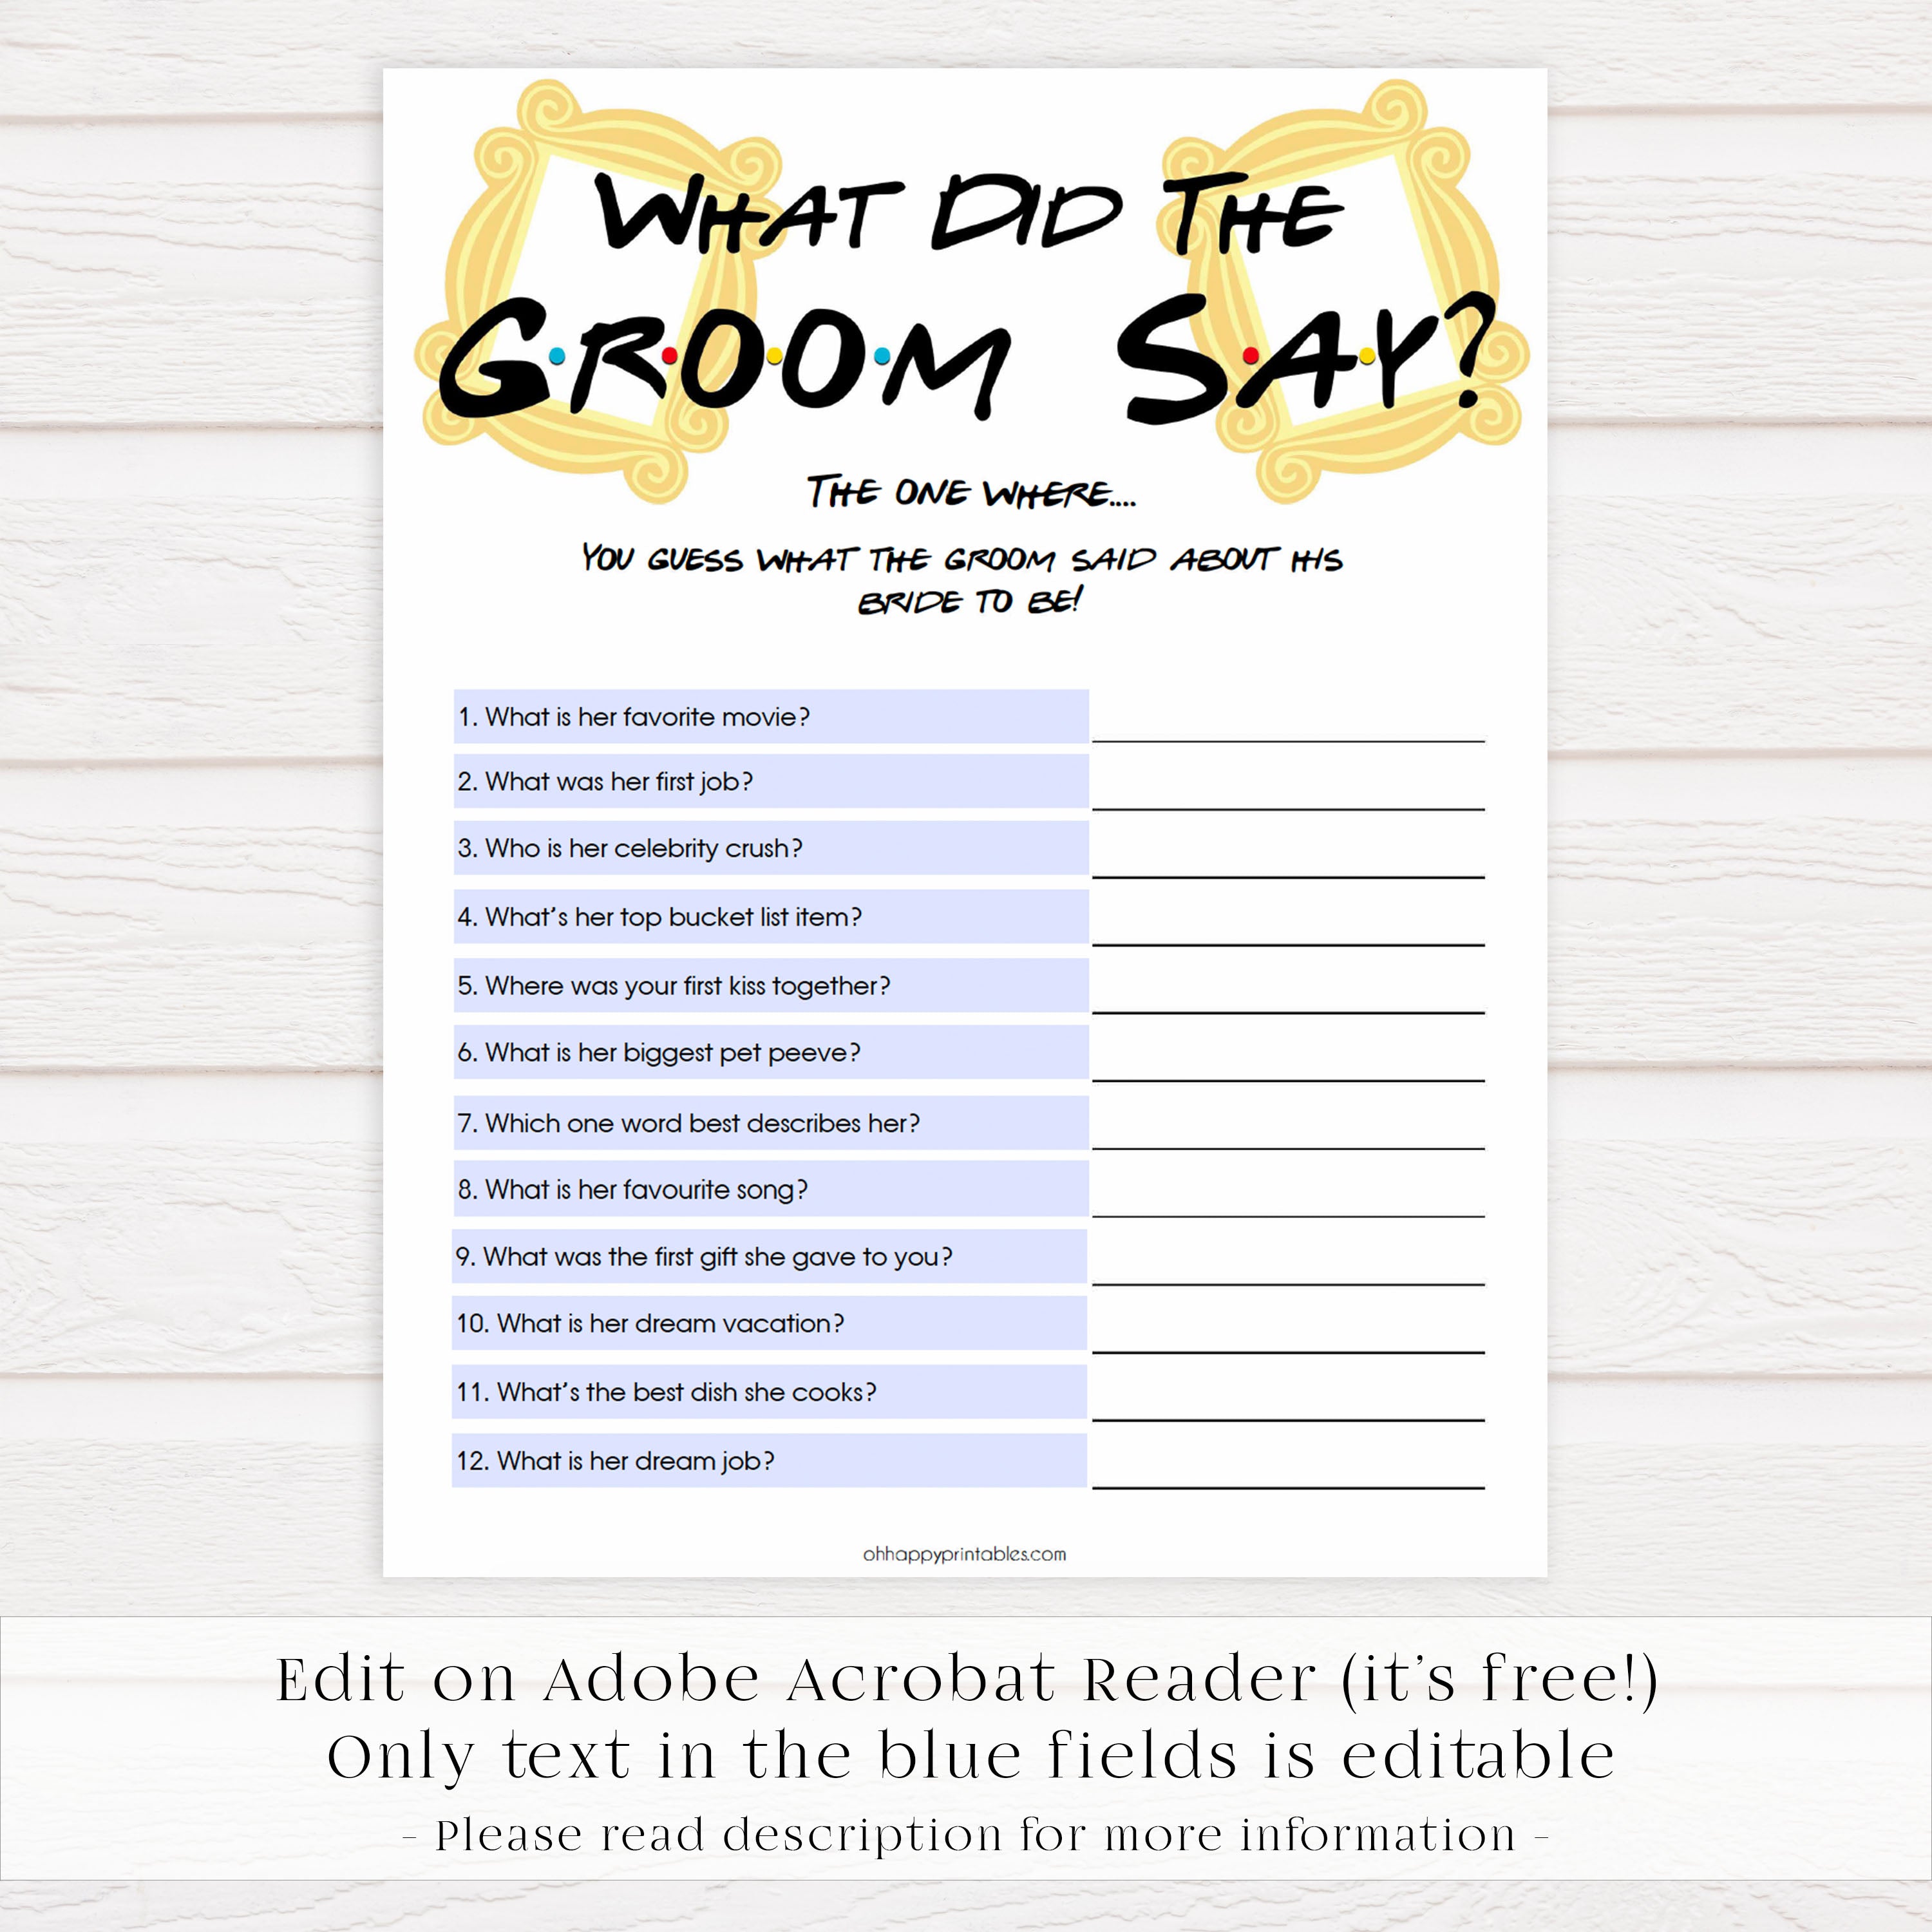 what did the groom say game, guess what the groom said, Printable bridal shower games, friends bridal shower, friends bridal shower games, fun bridal shower games, bridal shower game ideas, friends bridal shower